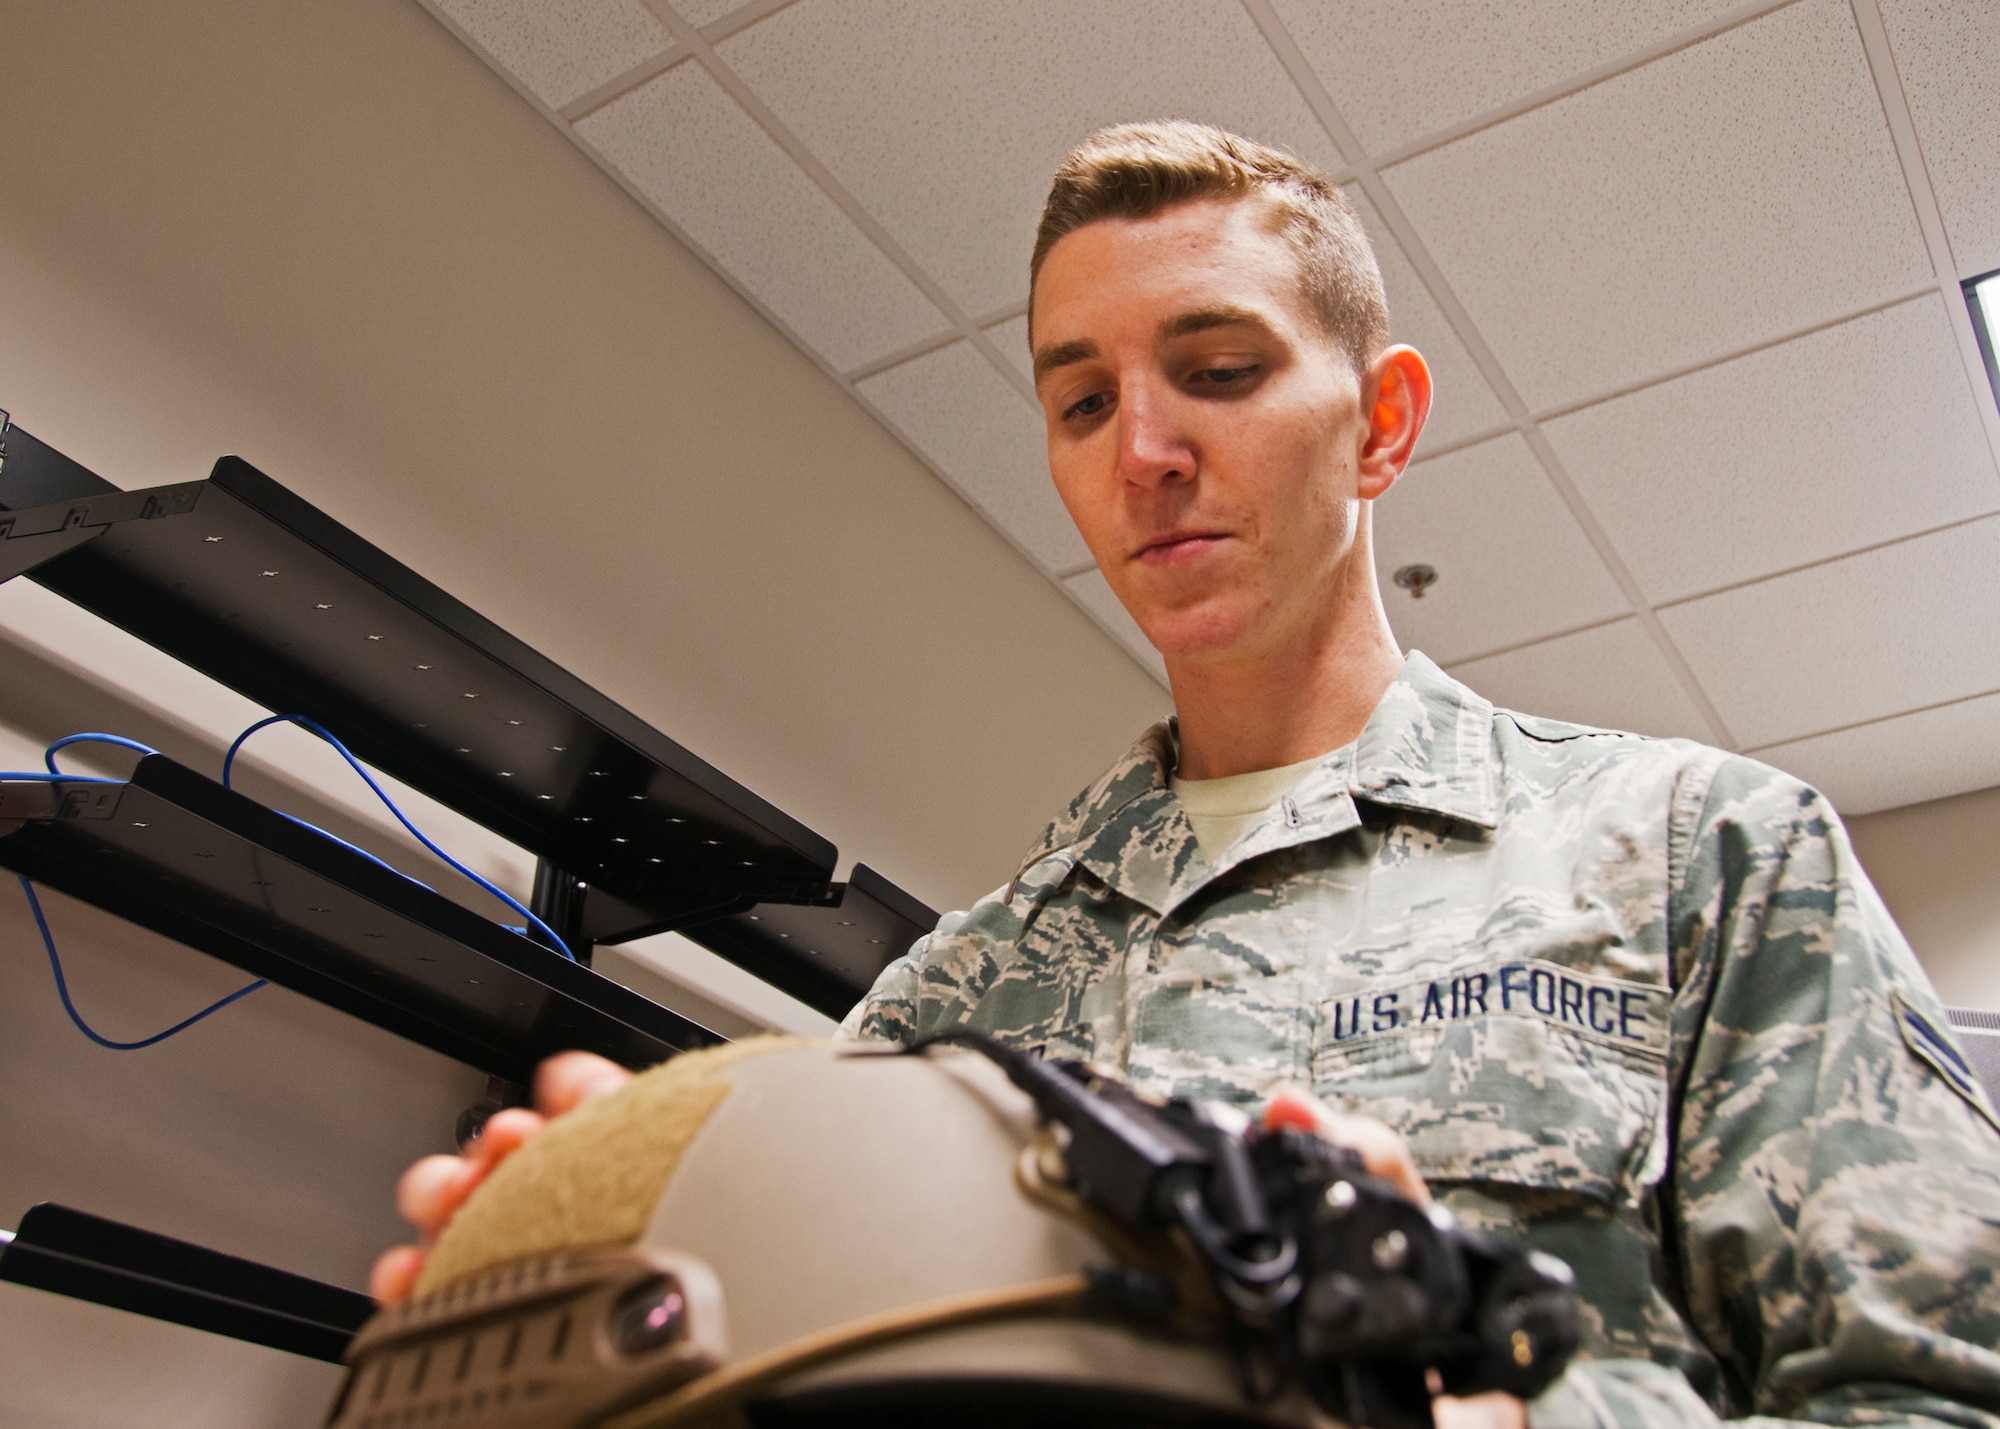 Airman 1st Class Stephen Lowmiller, a 919th Special Operations Support Squadron aircrew flight equipment journeyman, inspects an Ops-Core helmet in his workcenter at Duke Field, Fla. recently.